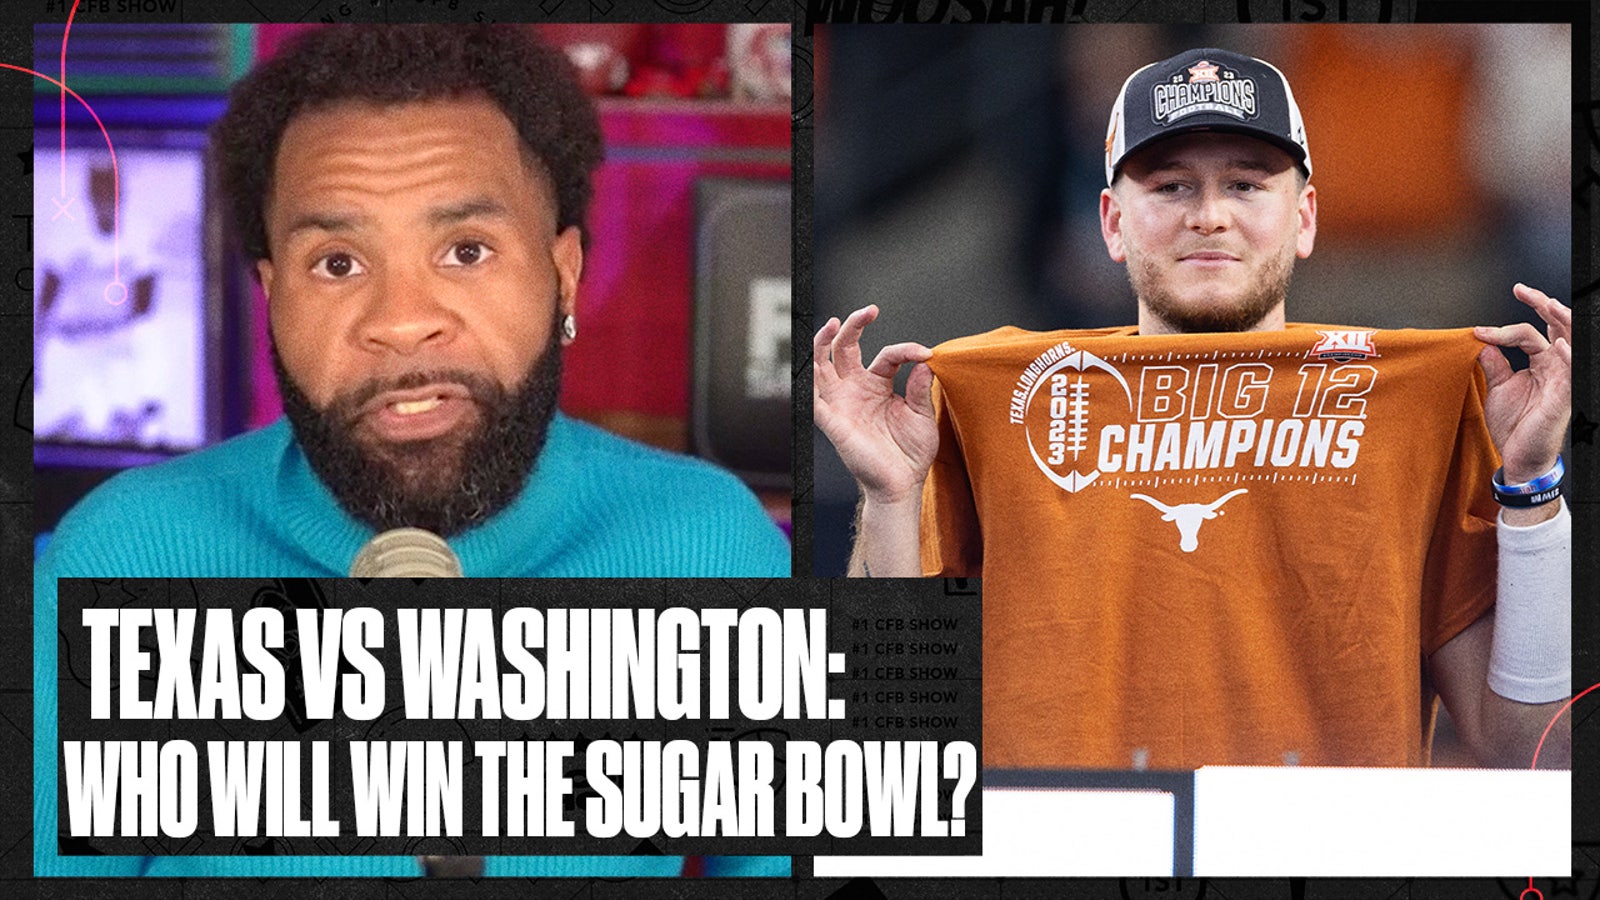 Texas, Washington square off in epic matchup